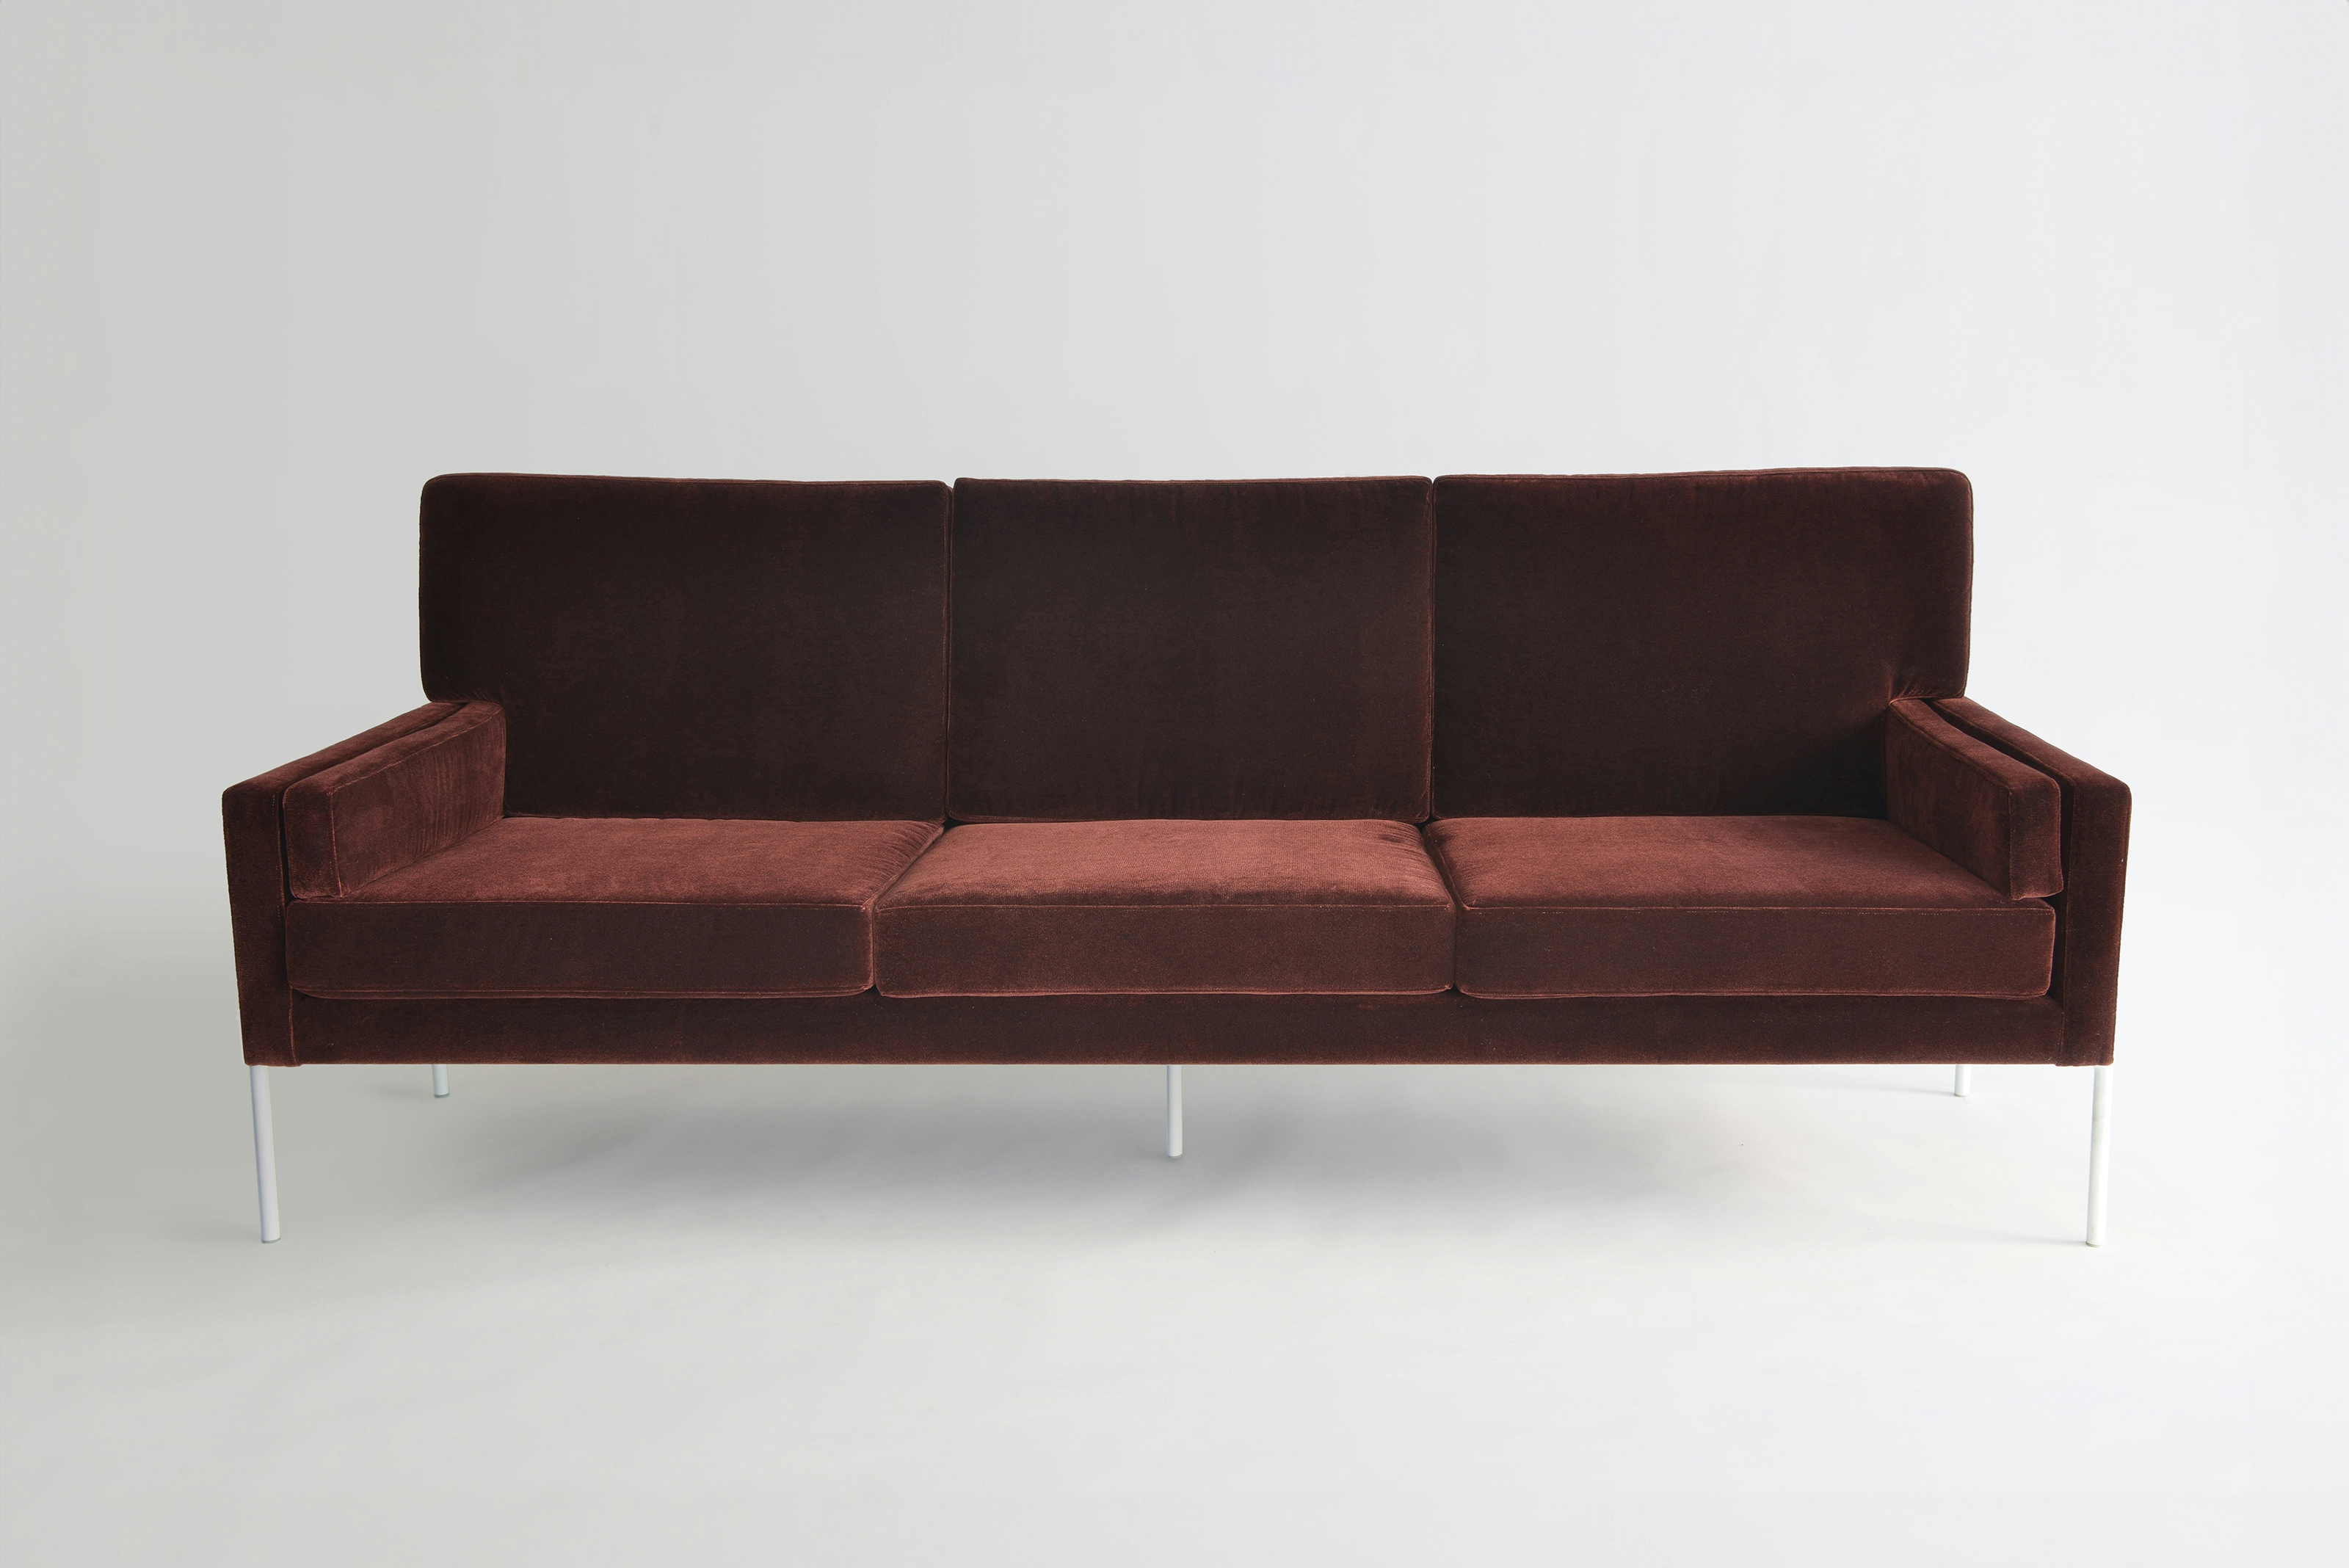 Phase Design Trolley Sofa 1 Product Page Web